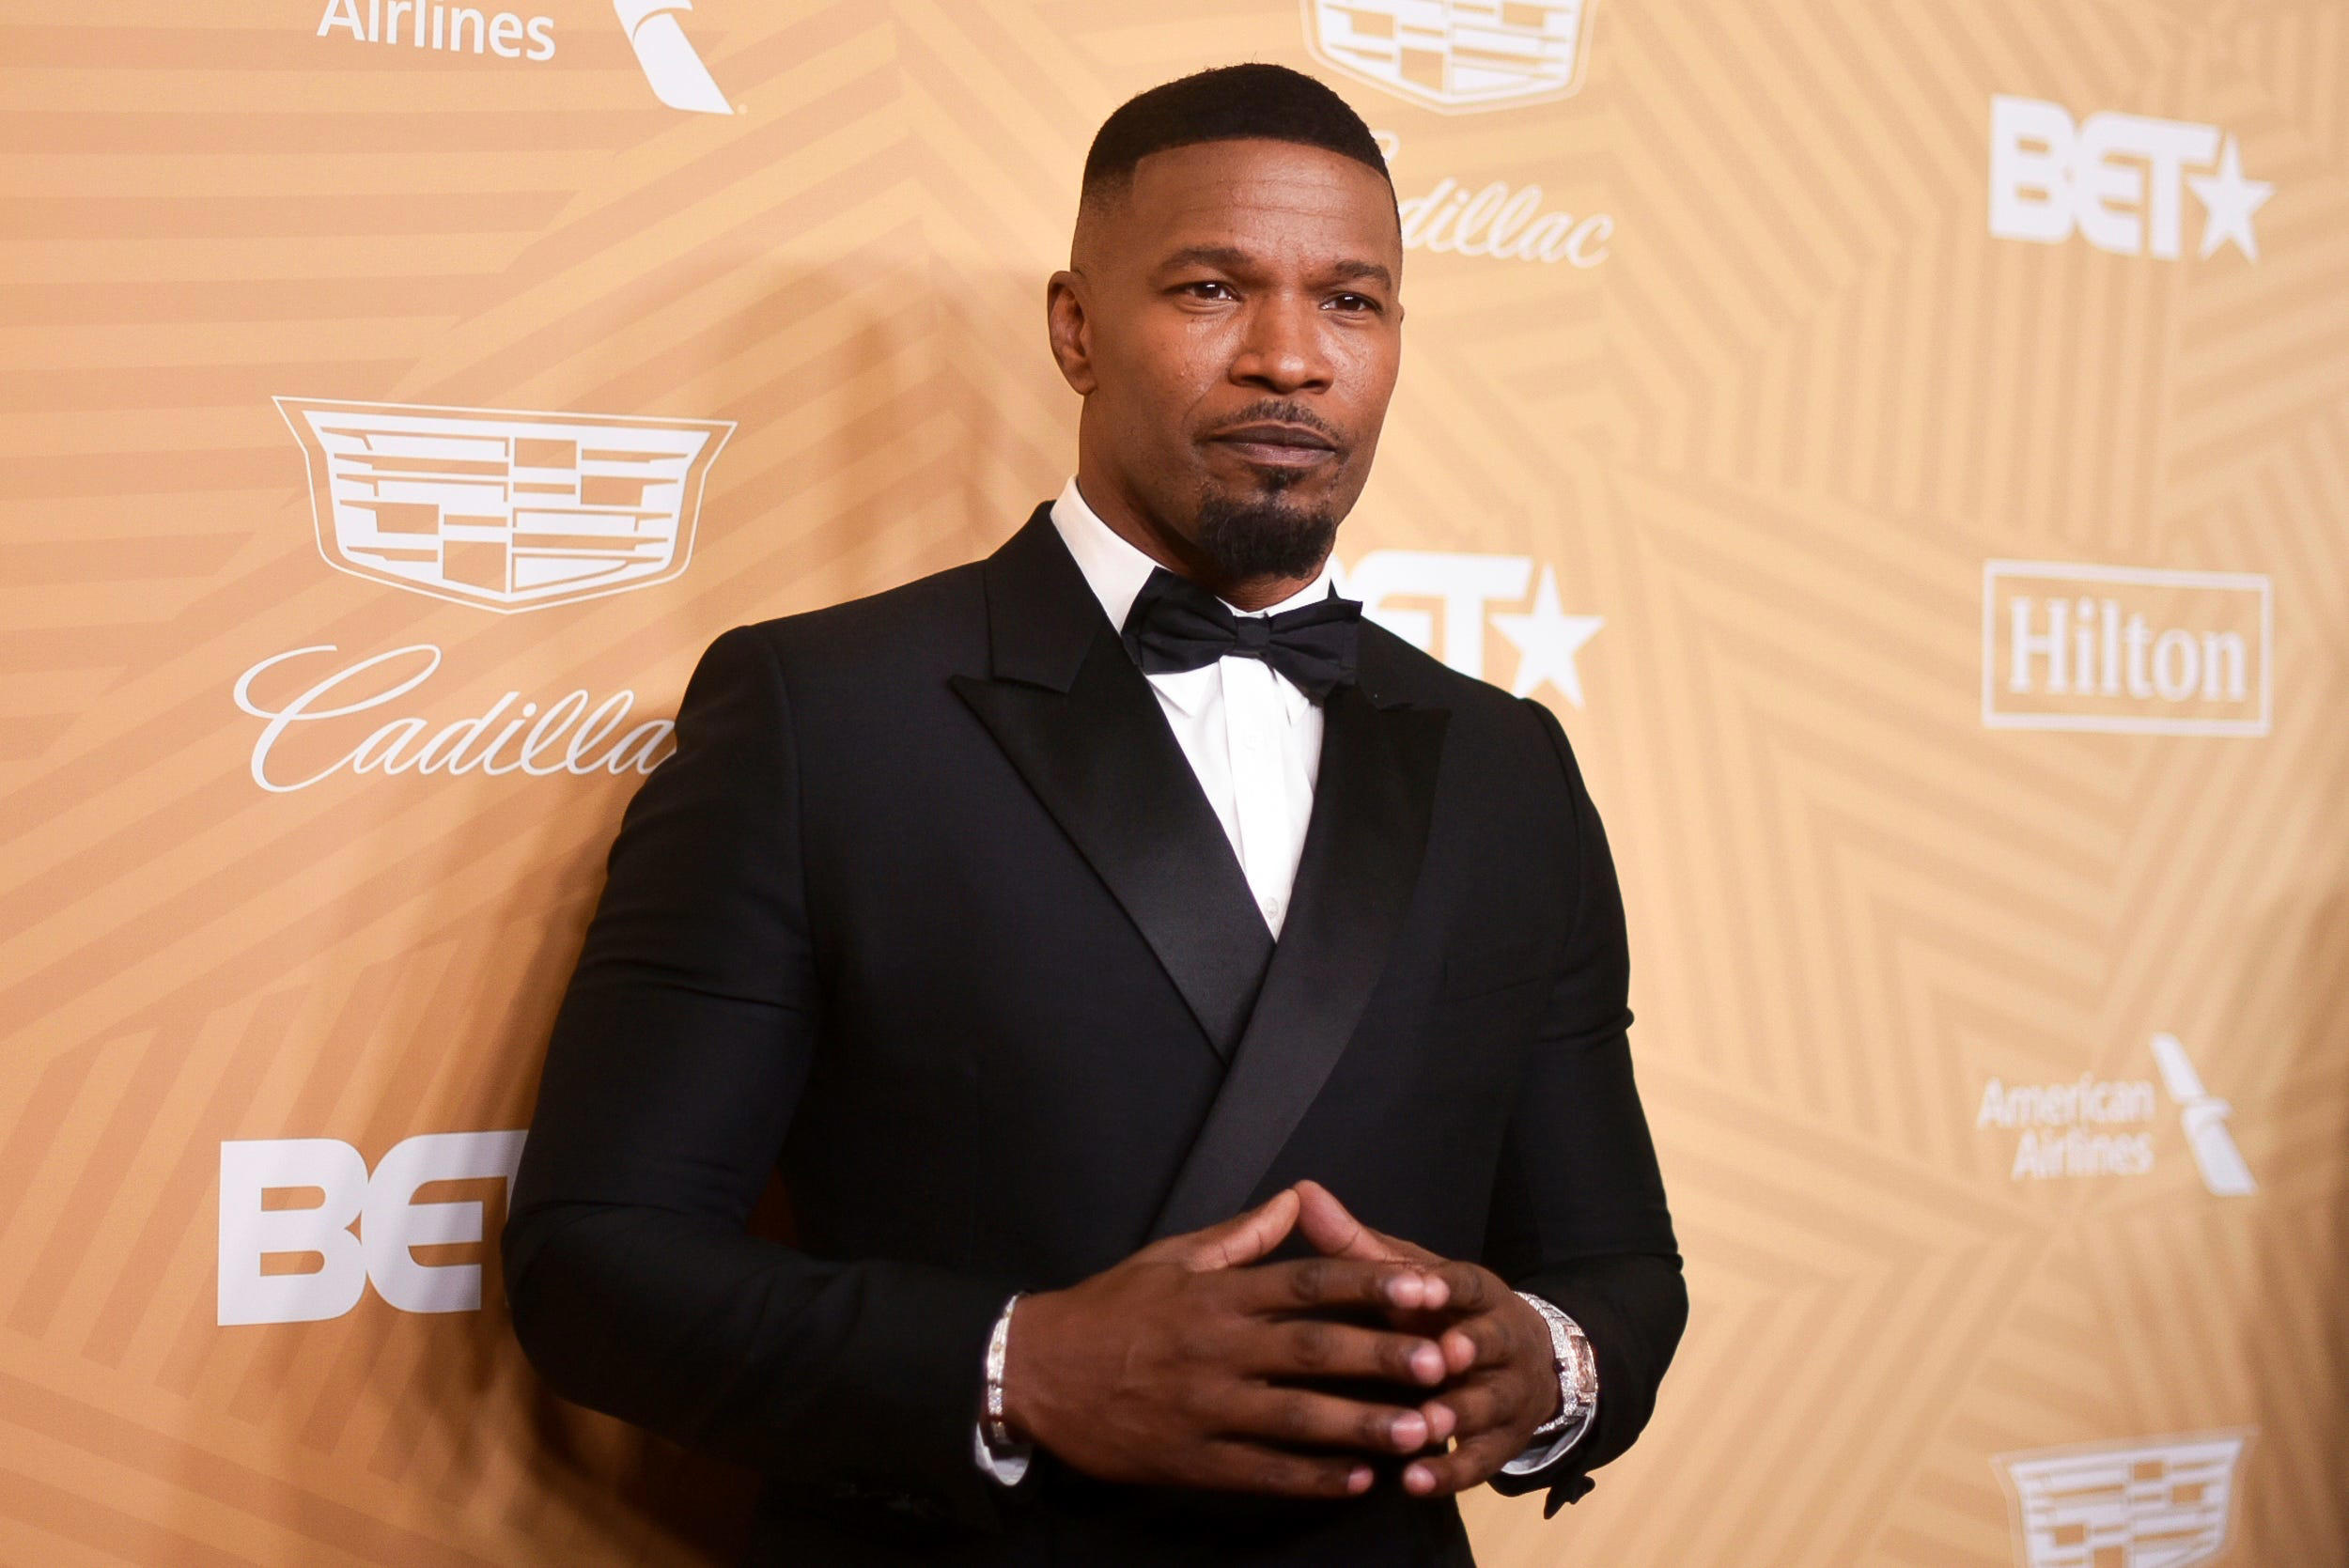 What happened to Jamie Foxx? Everything we know about his health